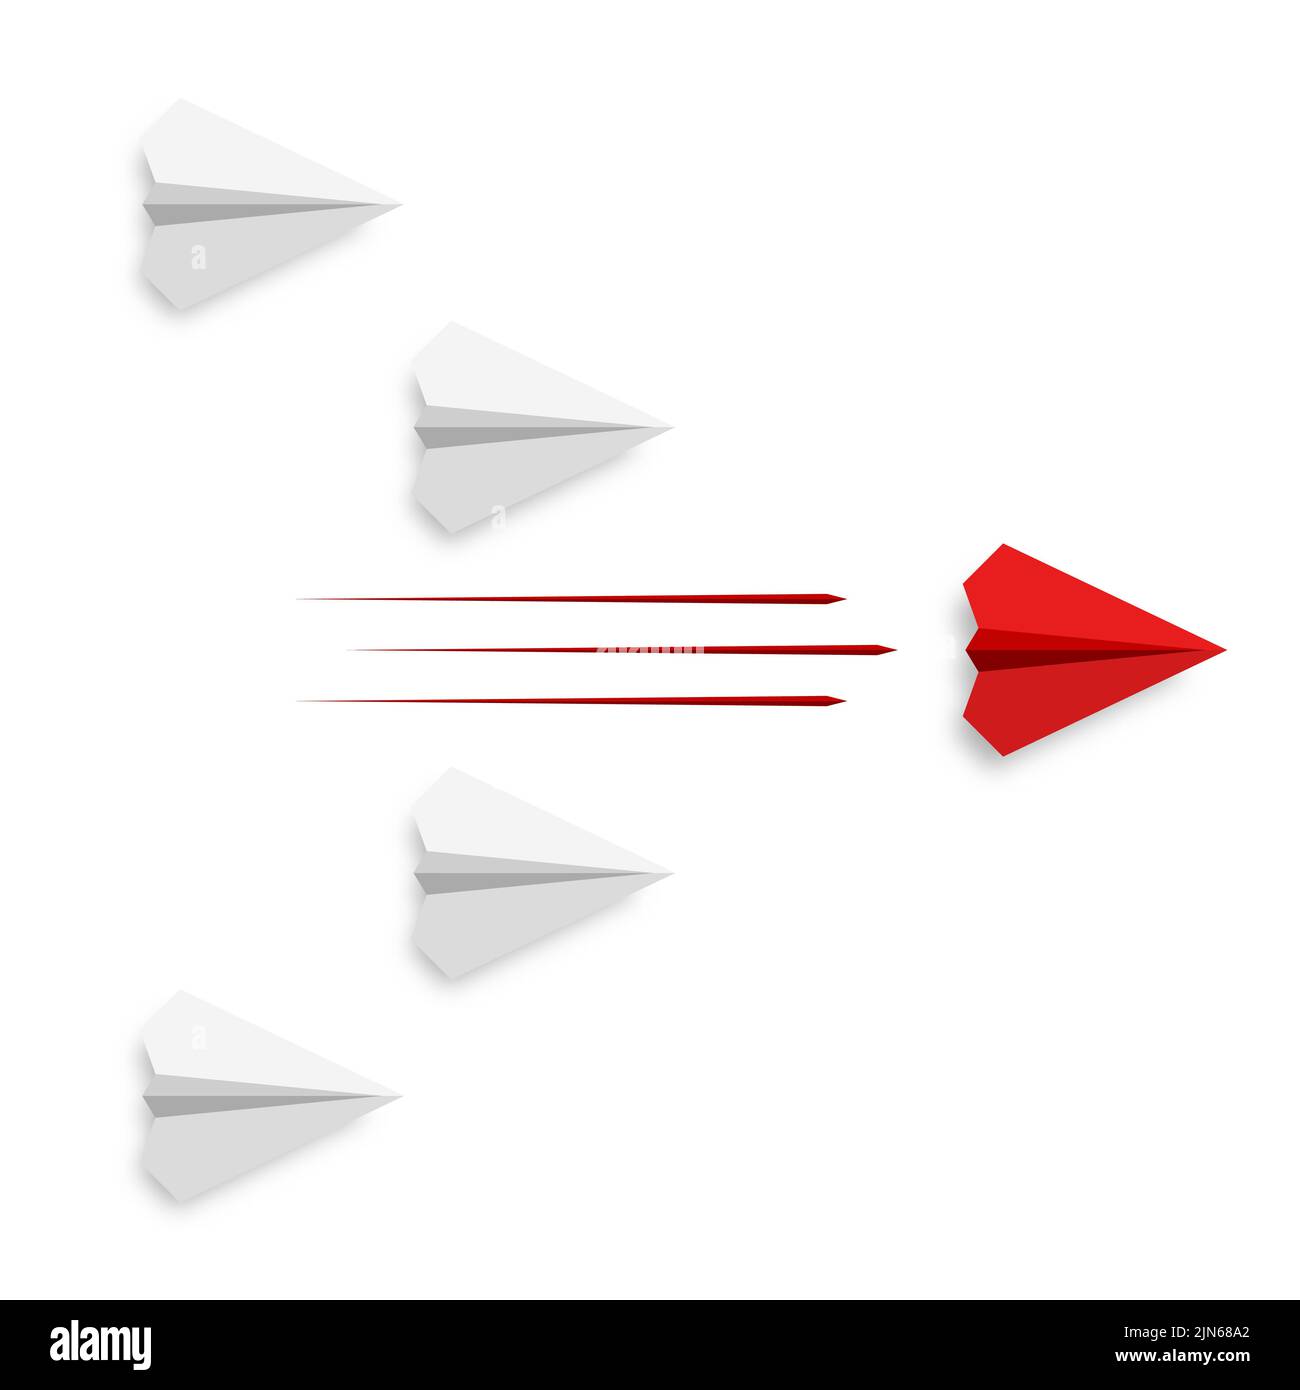 Flying paper airplanes. Red paper plane flies first. Vector illustration. Business or success concept icon. Stock Vector